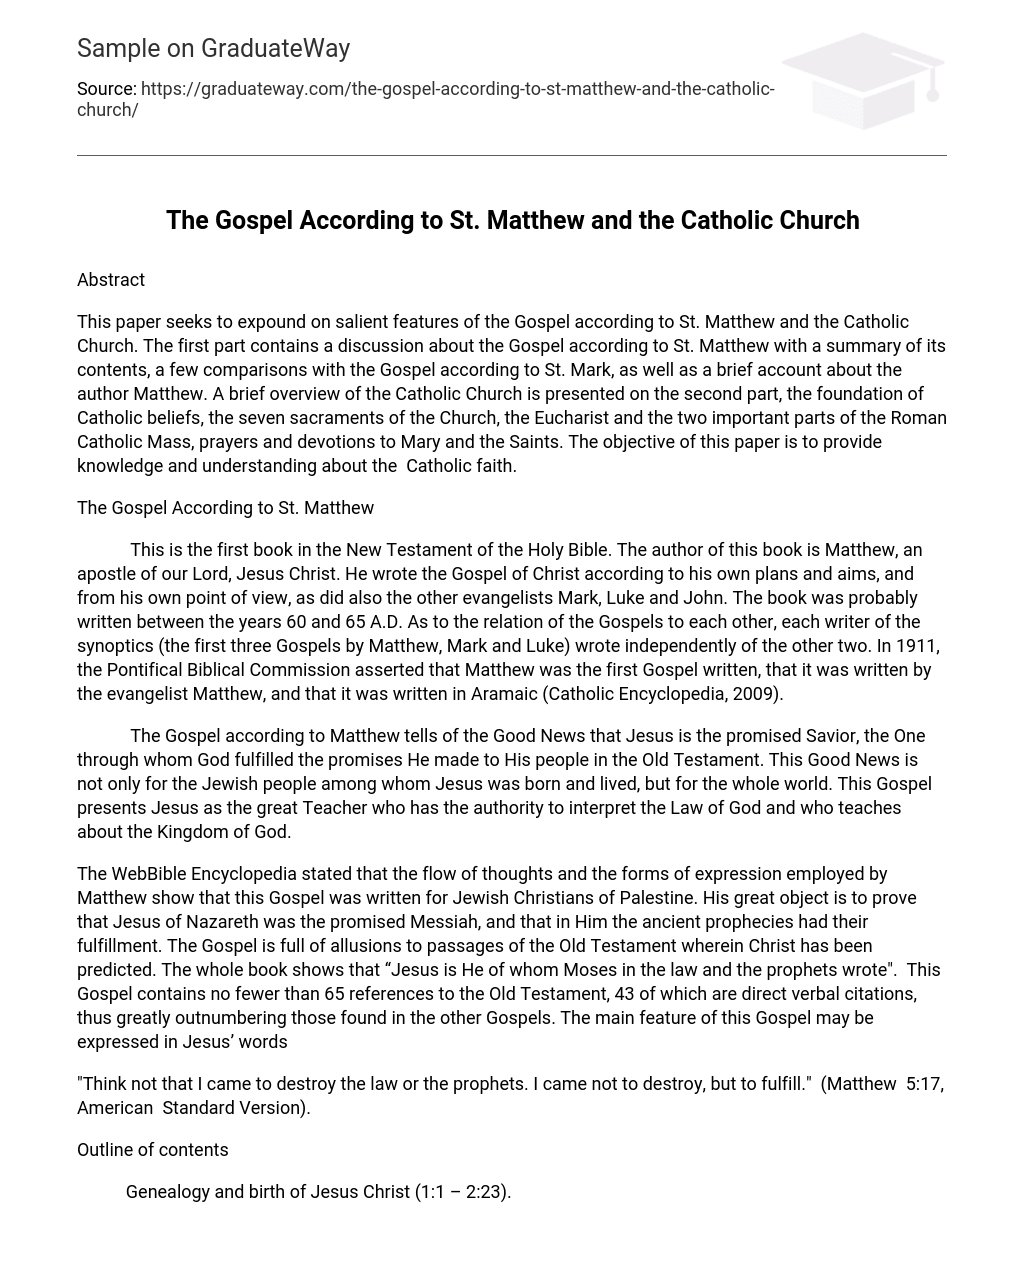 The Gospel According to St. Matthew and the Catholic Church